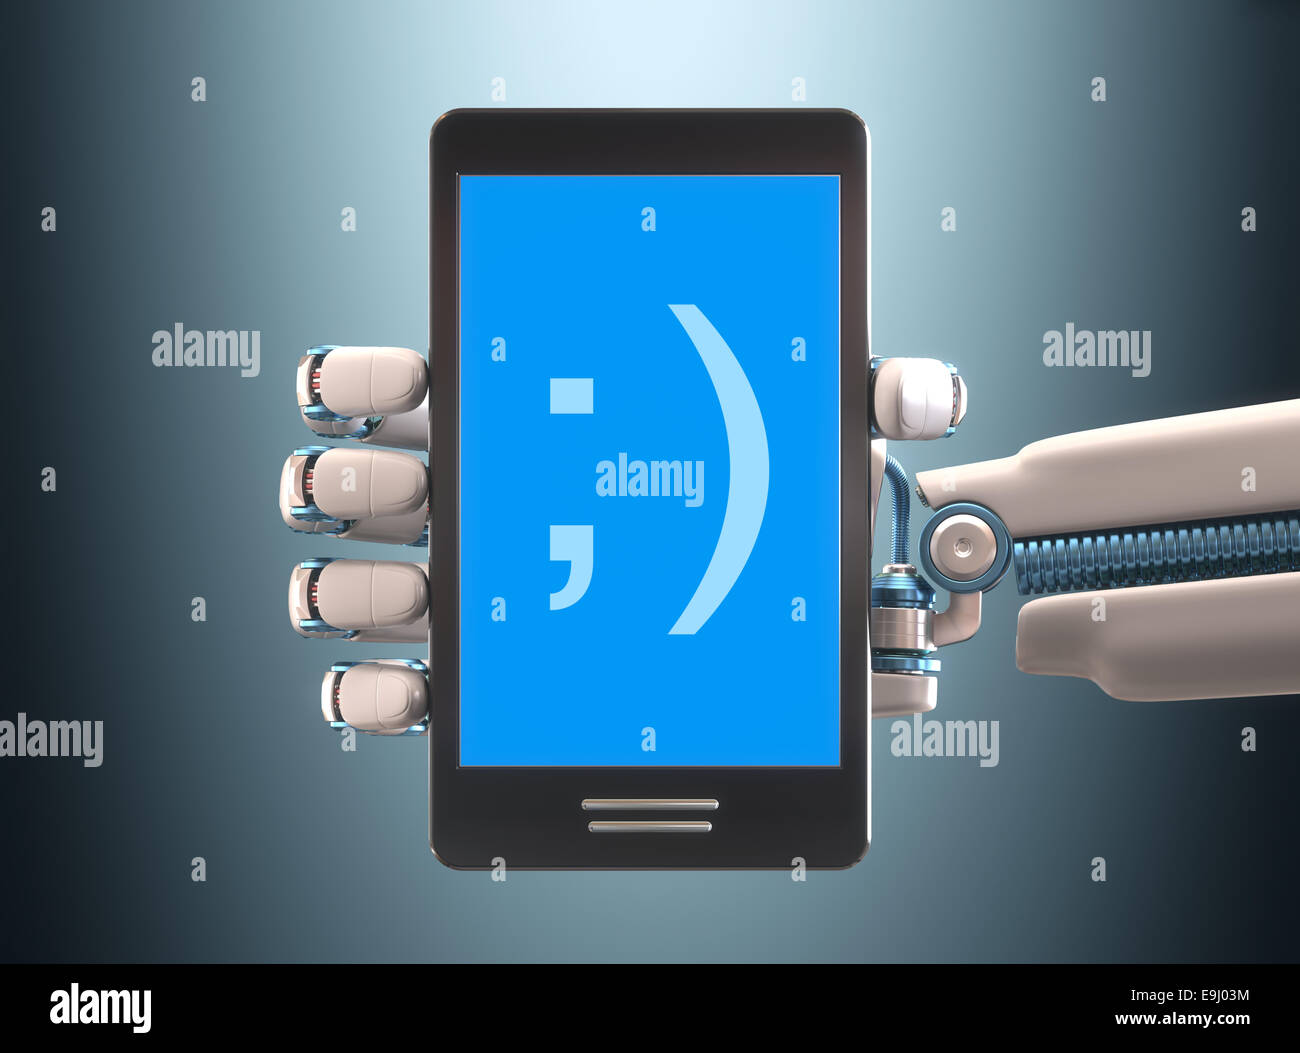 Robot hand holding a cell phone. Your text on the blue screen. Clipping path included. Stock Photo